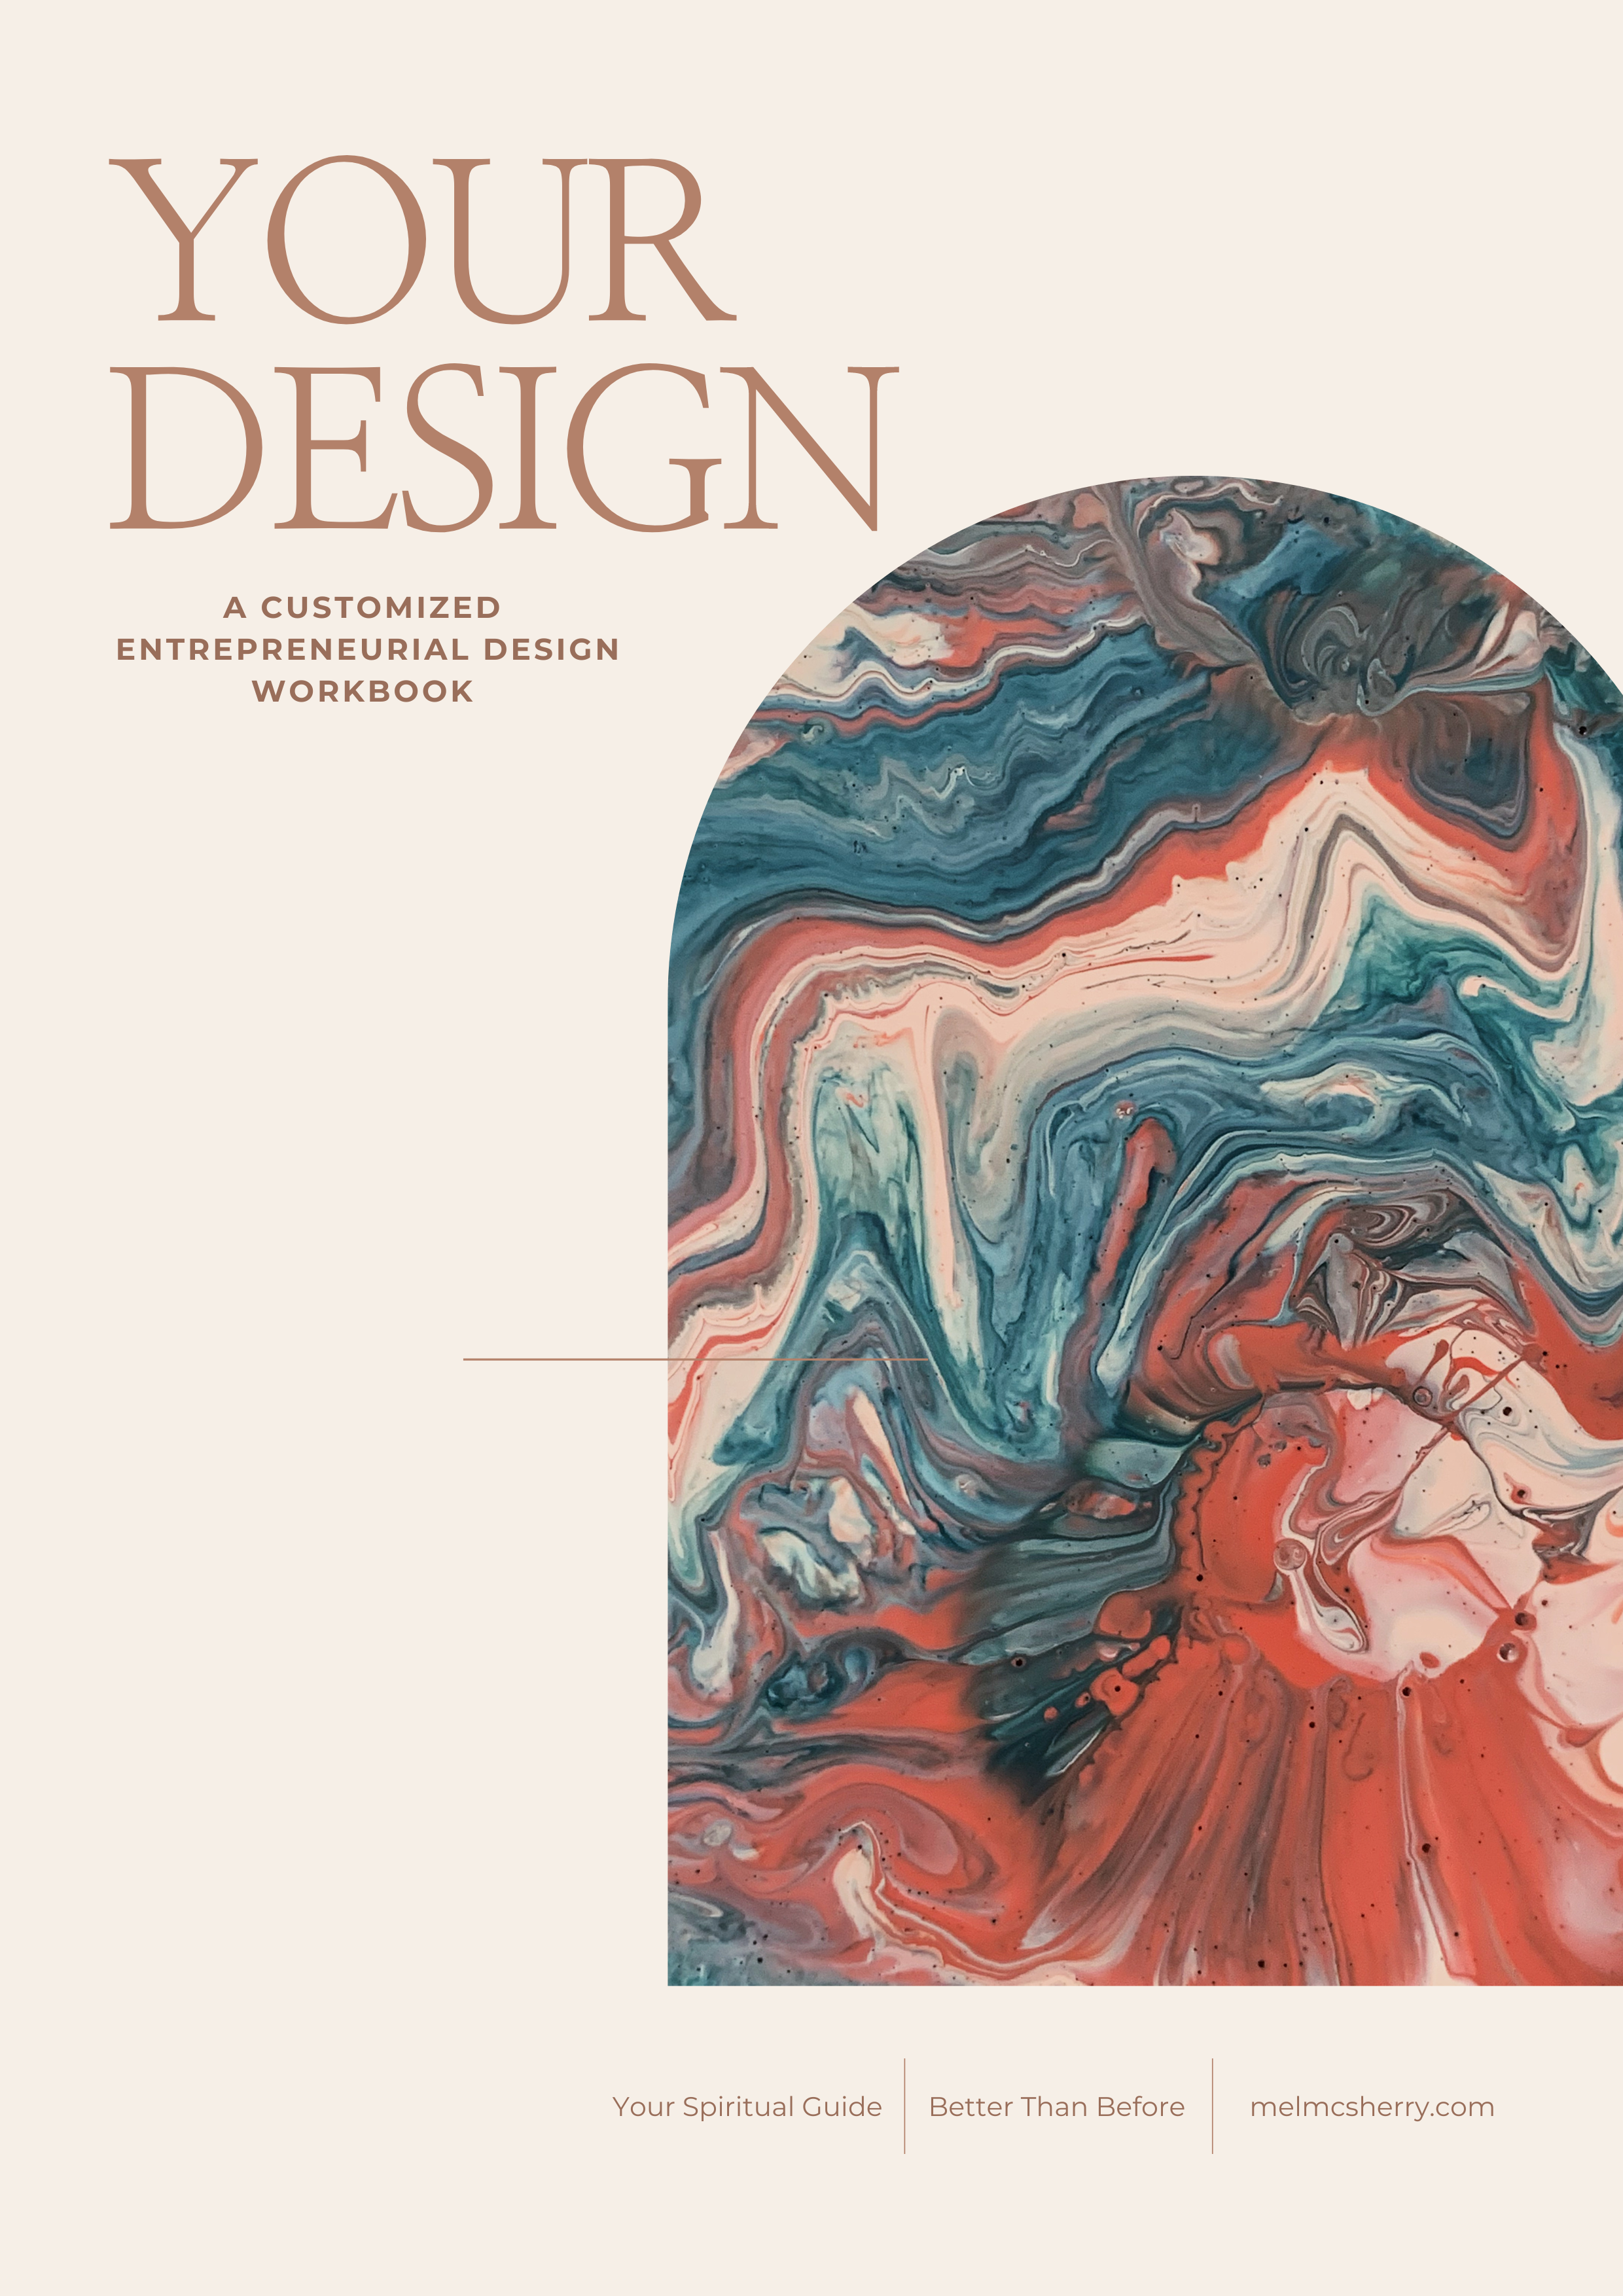 Cover saying "Your Design- a customized entrepreneurial design workbook"